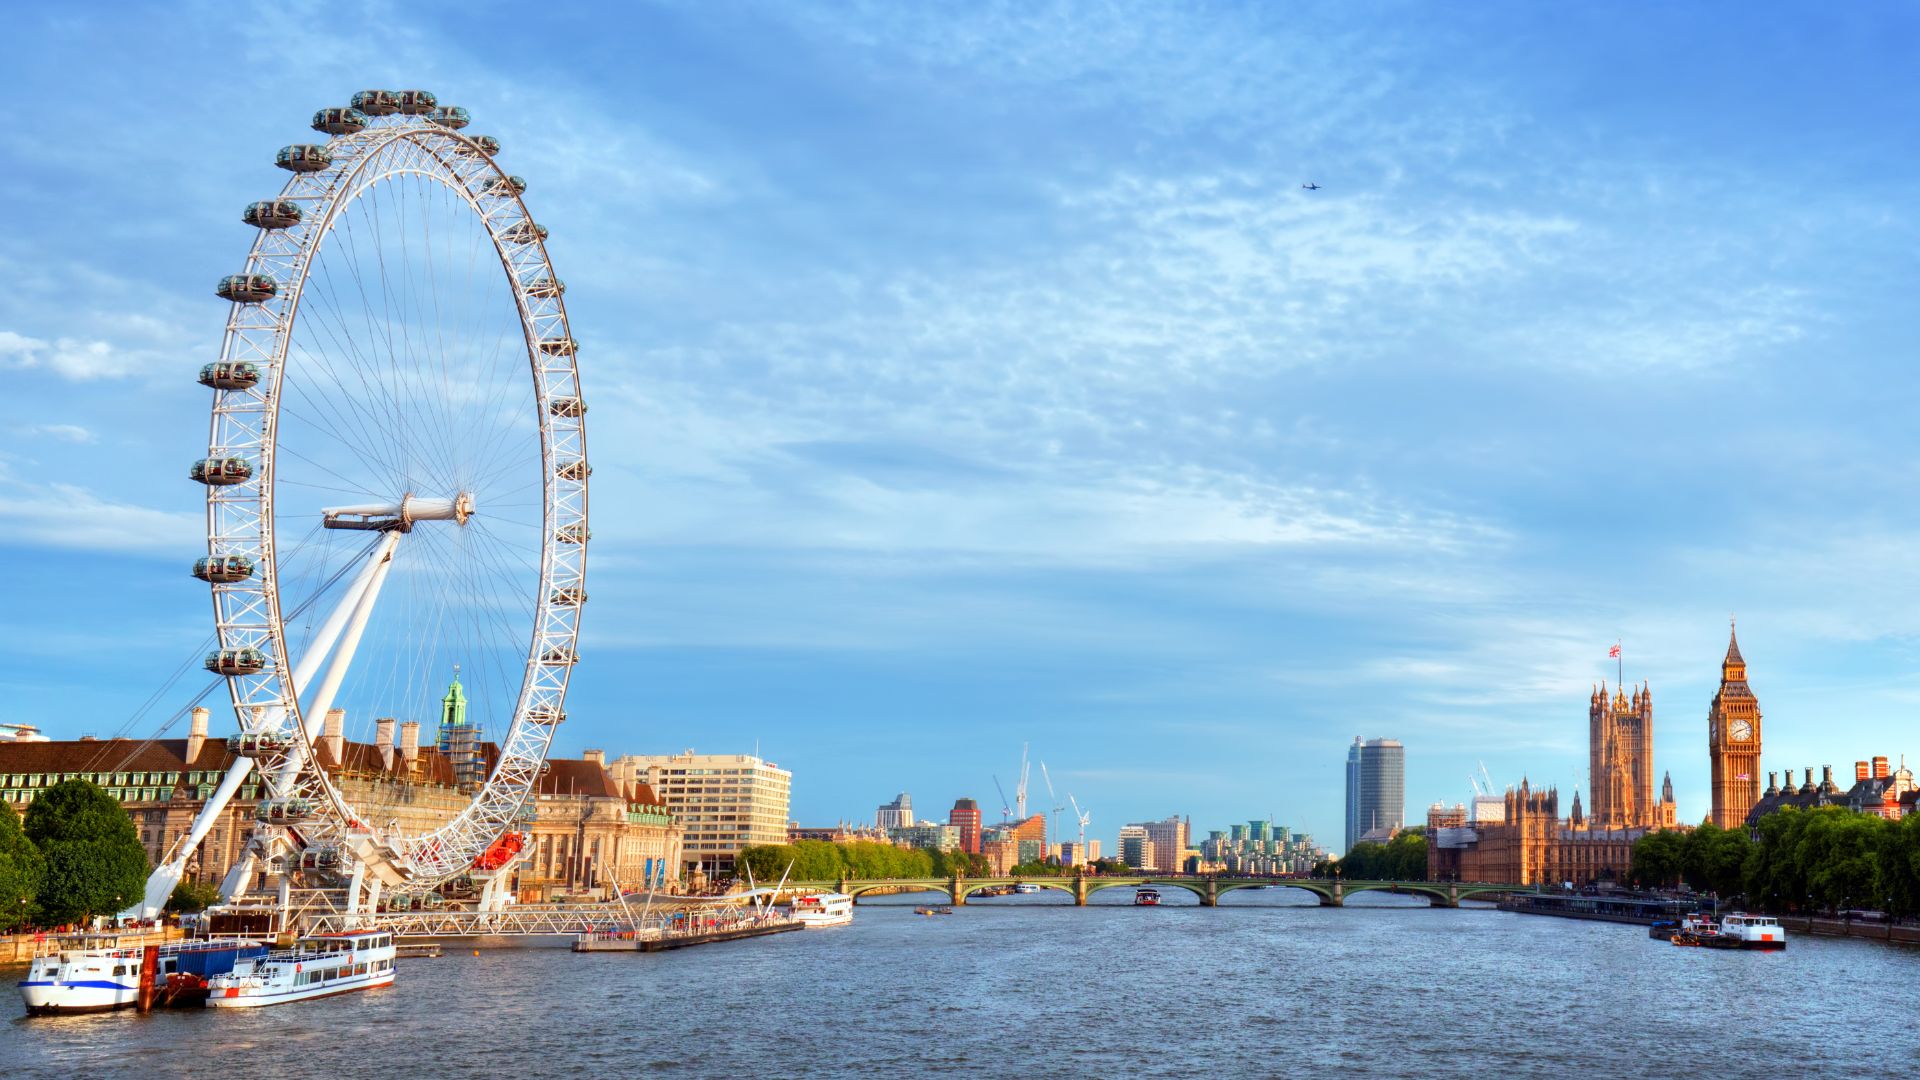 Photograph of London landscape in the UK, featuring the London Eye and Big Ben